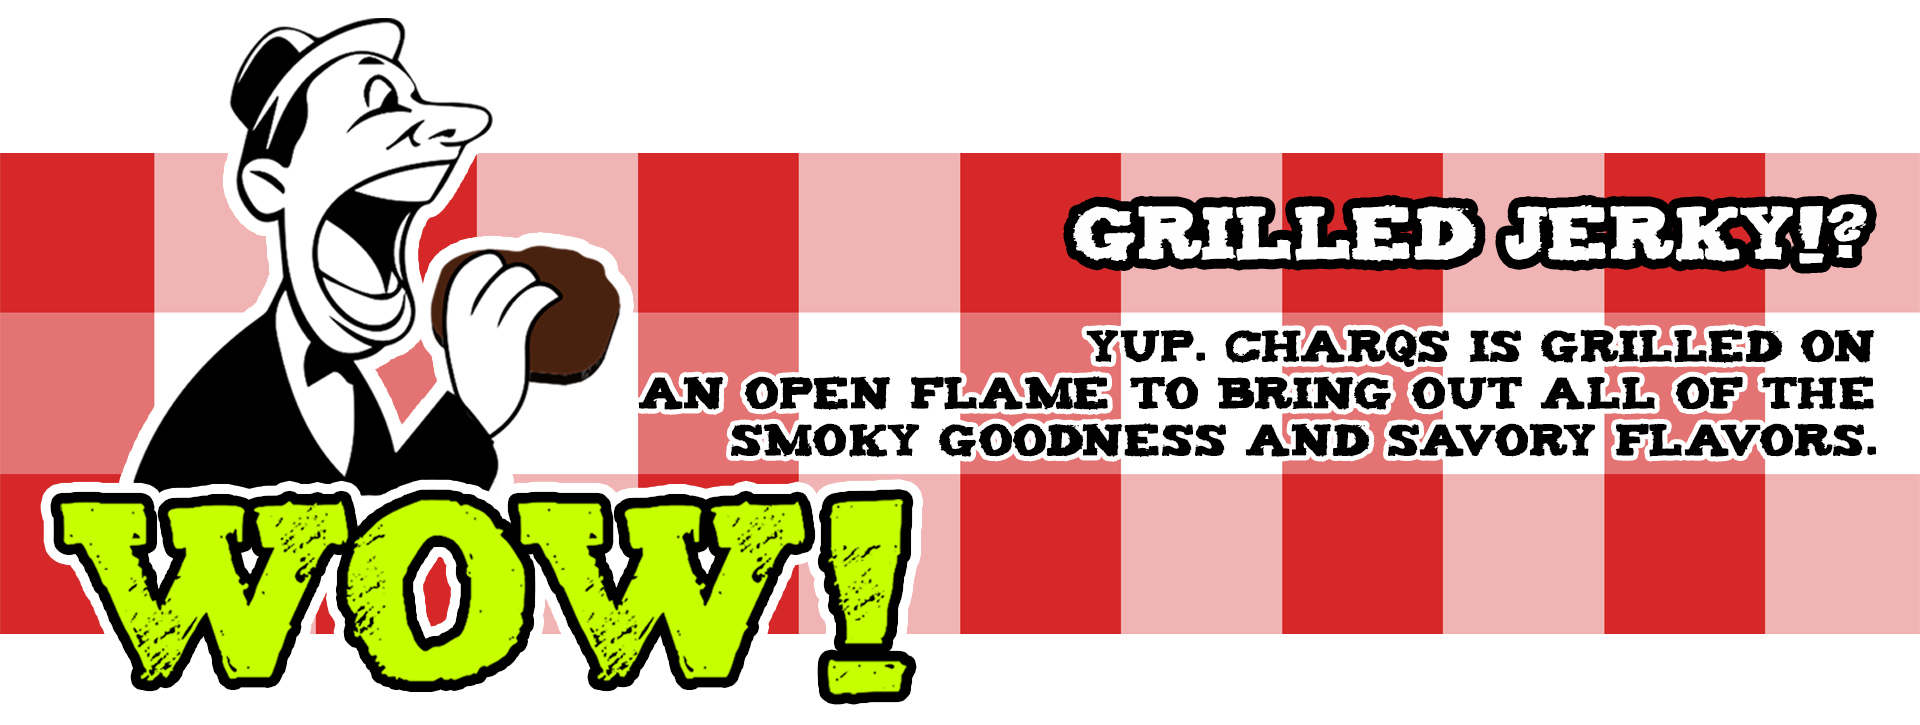 Try Our Grilled Pork Jerky